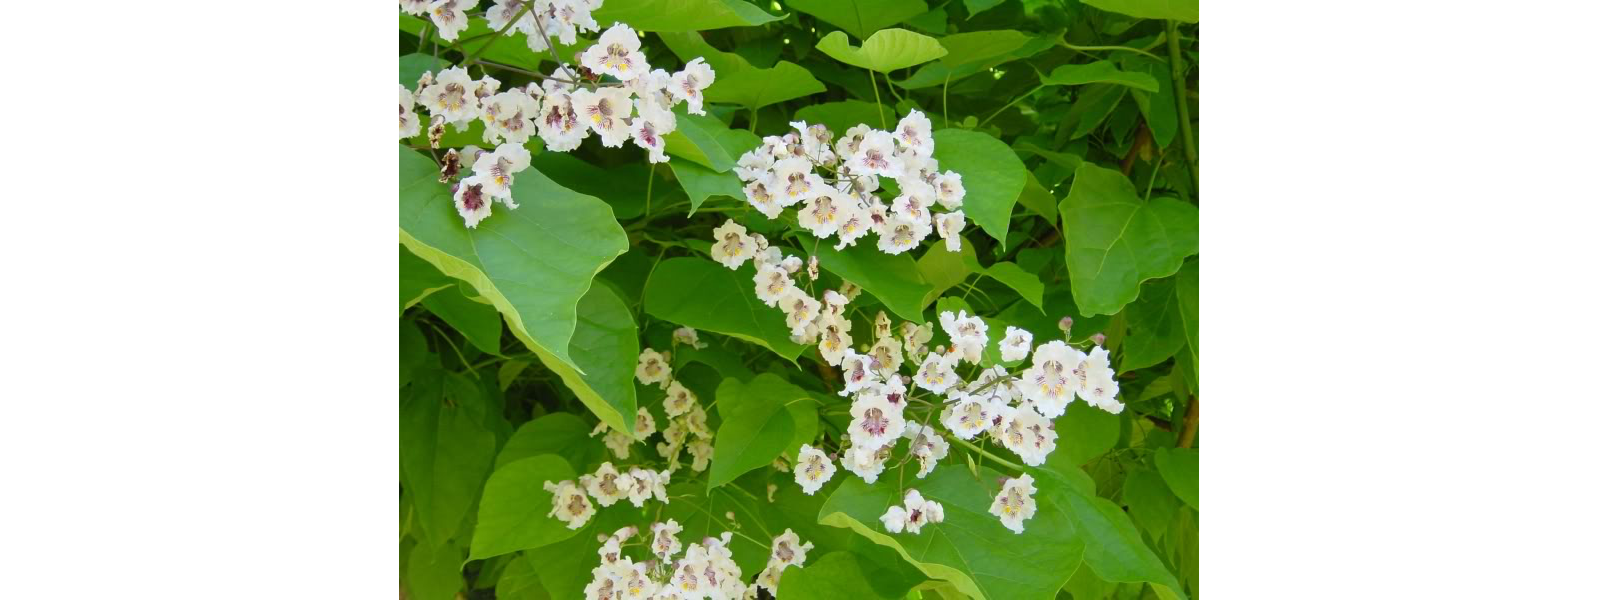 Closeup of catalpa flowers—small, white blossoms with reddish interior against green leaves